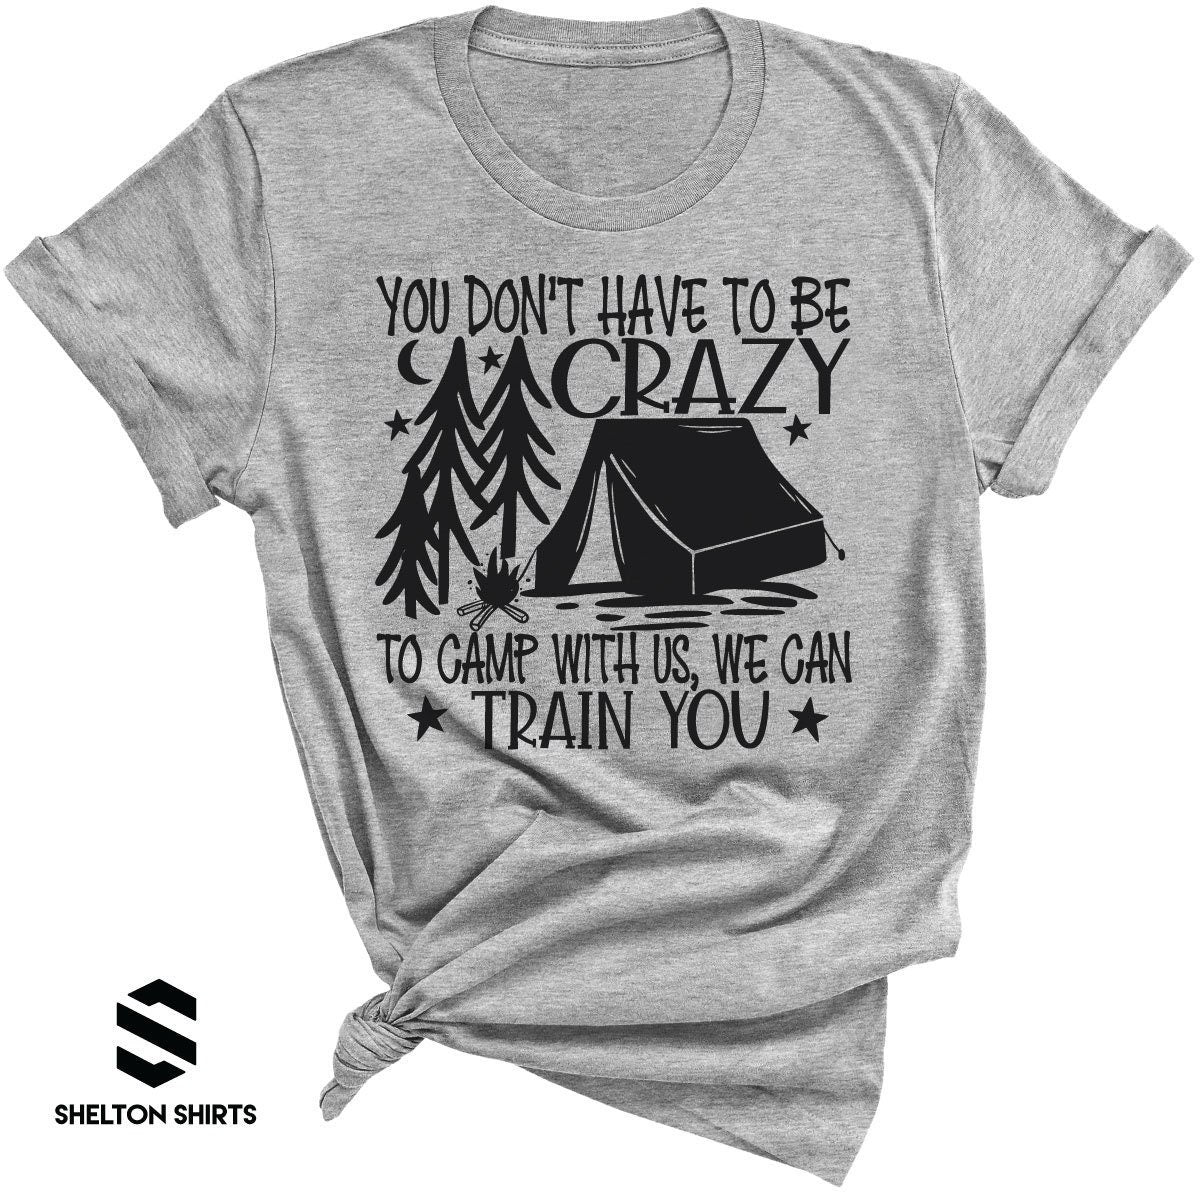 be us you T-Sh train SheltonShirts crazy to don\'t can – have camp with we You to Funny